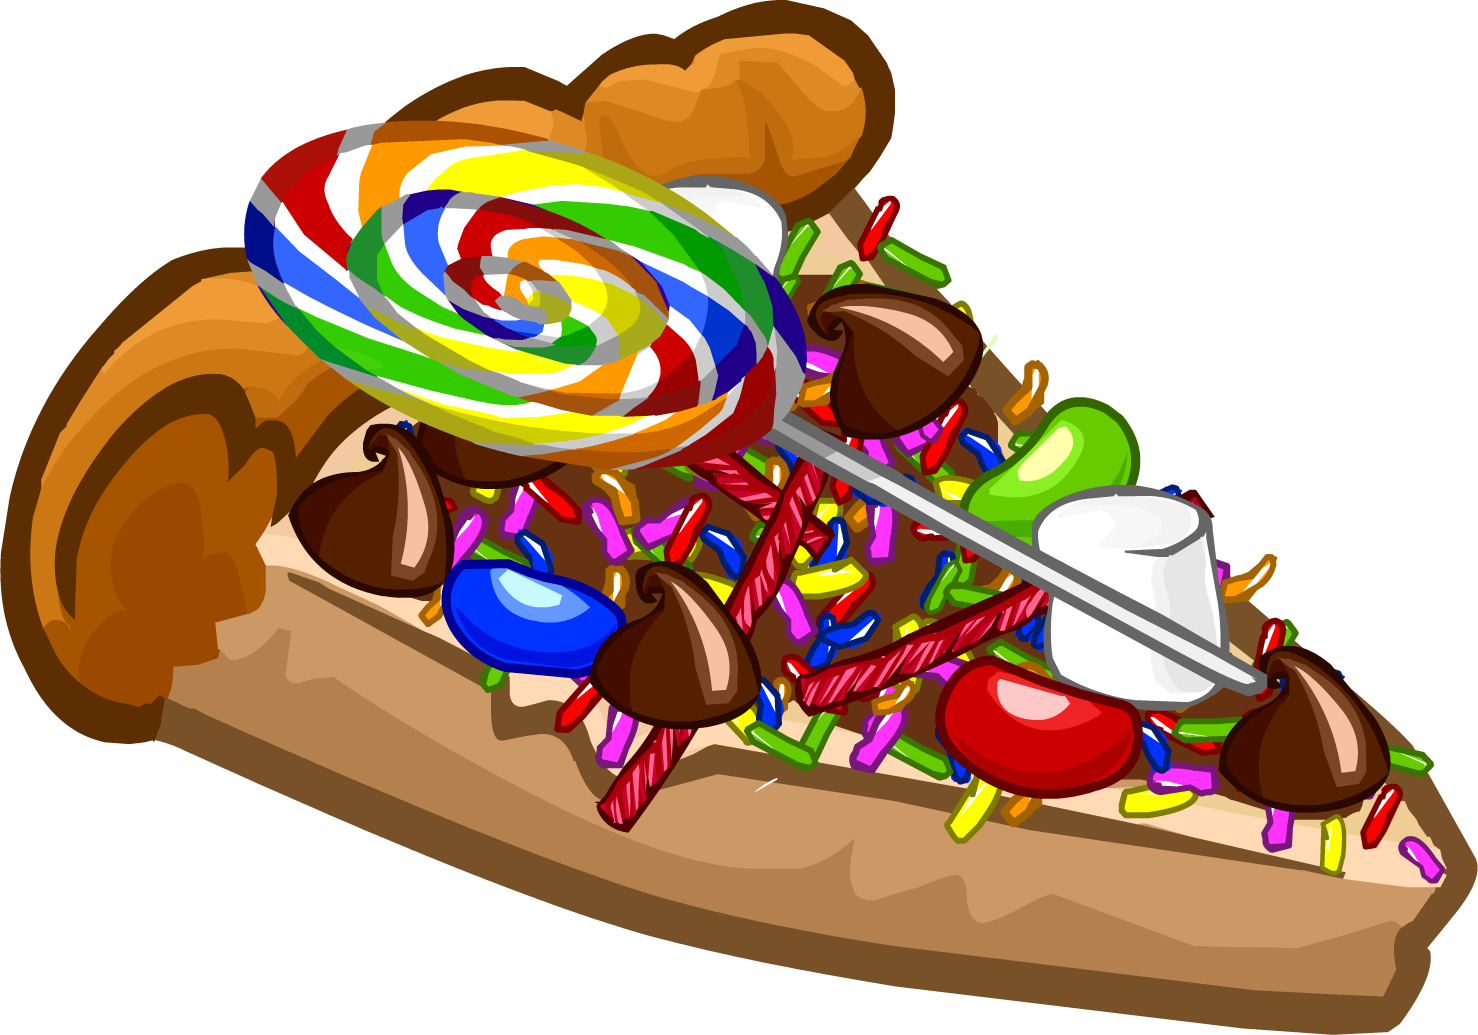 Puffle Care Icons Pizzacandydeluxe - Club Penguin Candy Pizza (1478x1035)